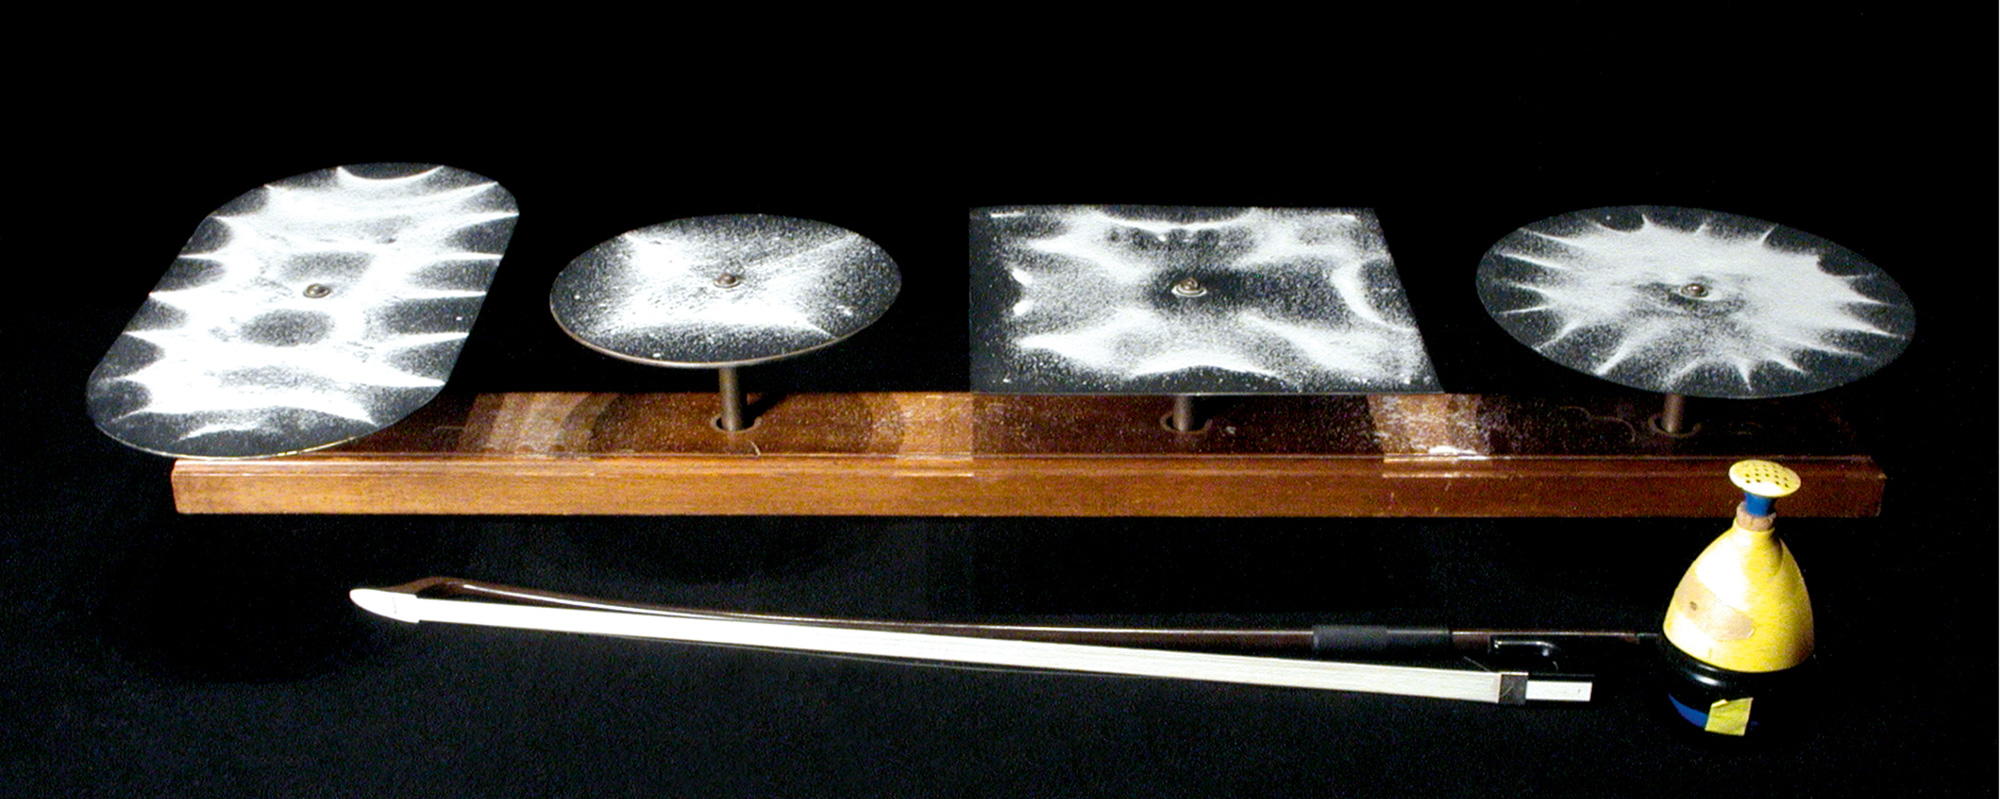 A photograph of Chladni plates showing different patterns of dispersion caused by their various shapes.